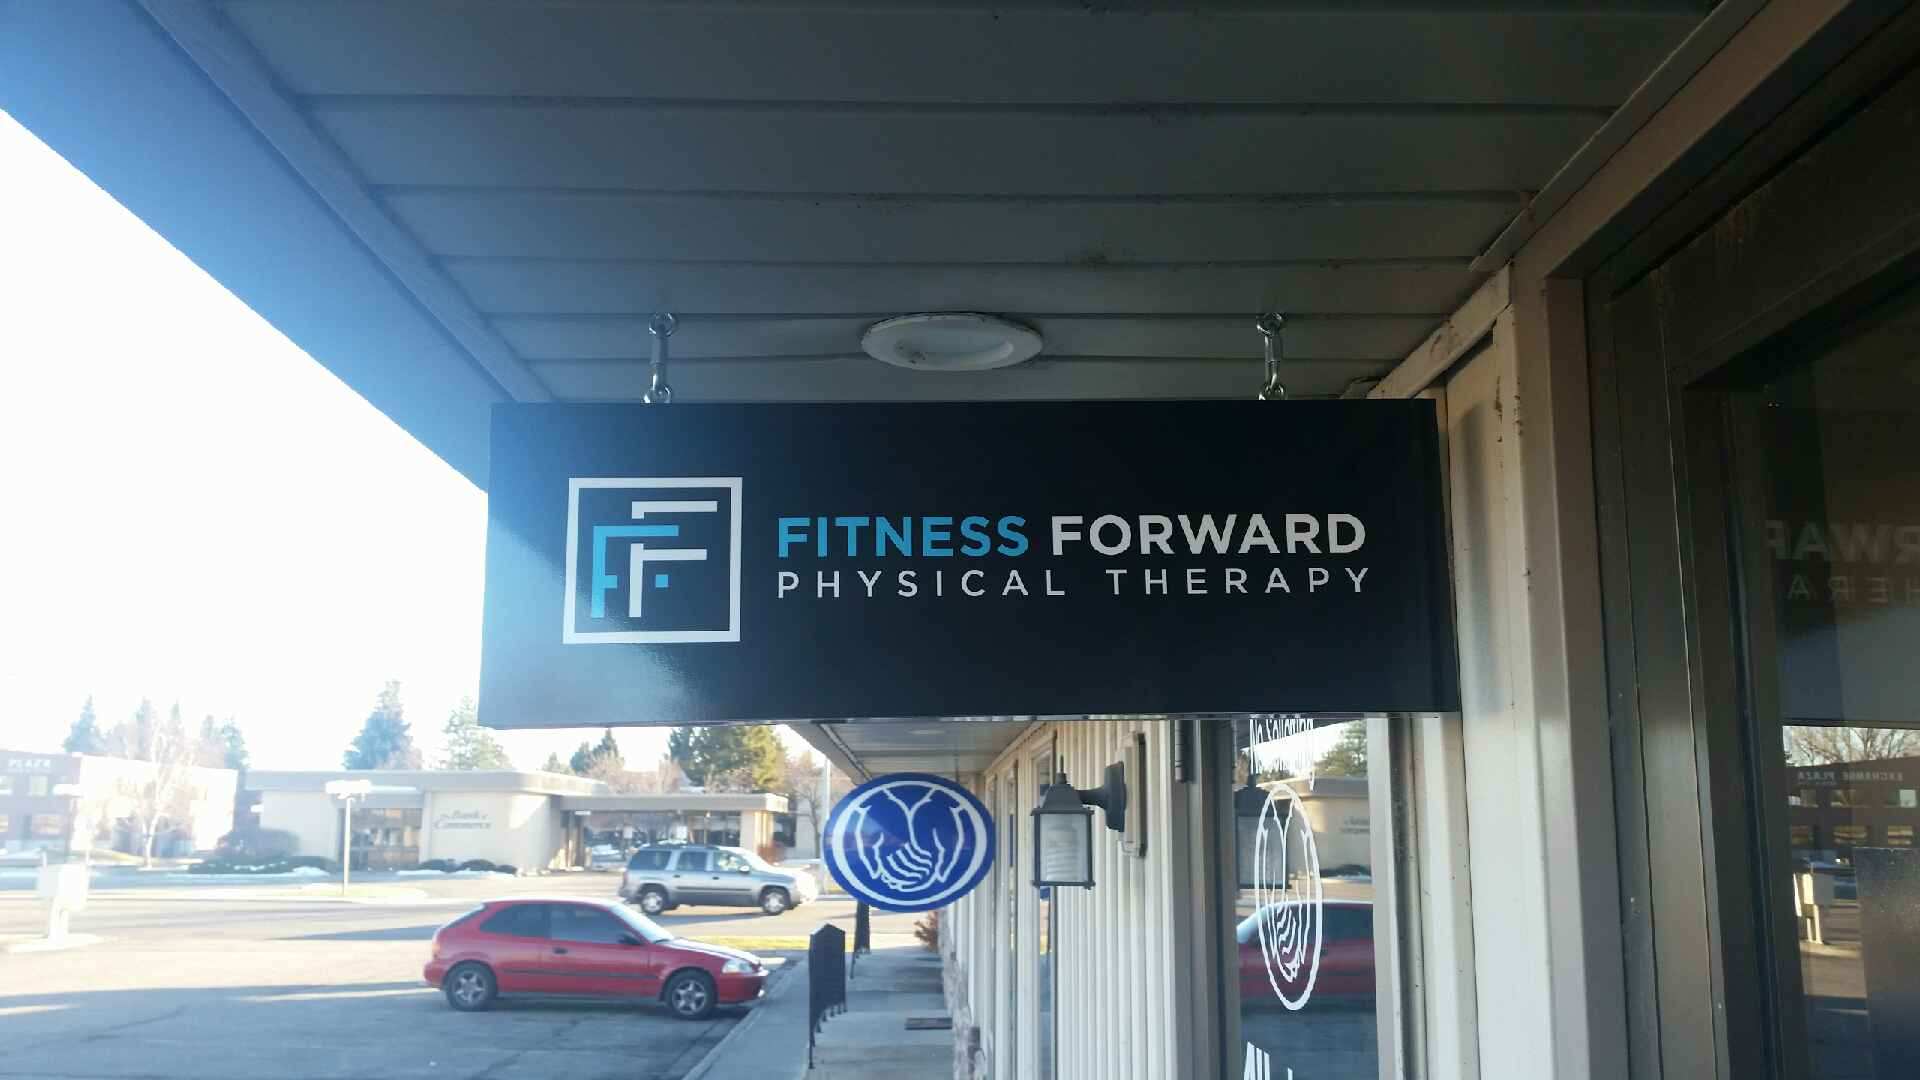 Fitness Forward Physical Therapy